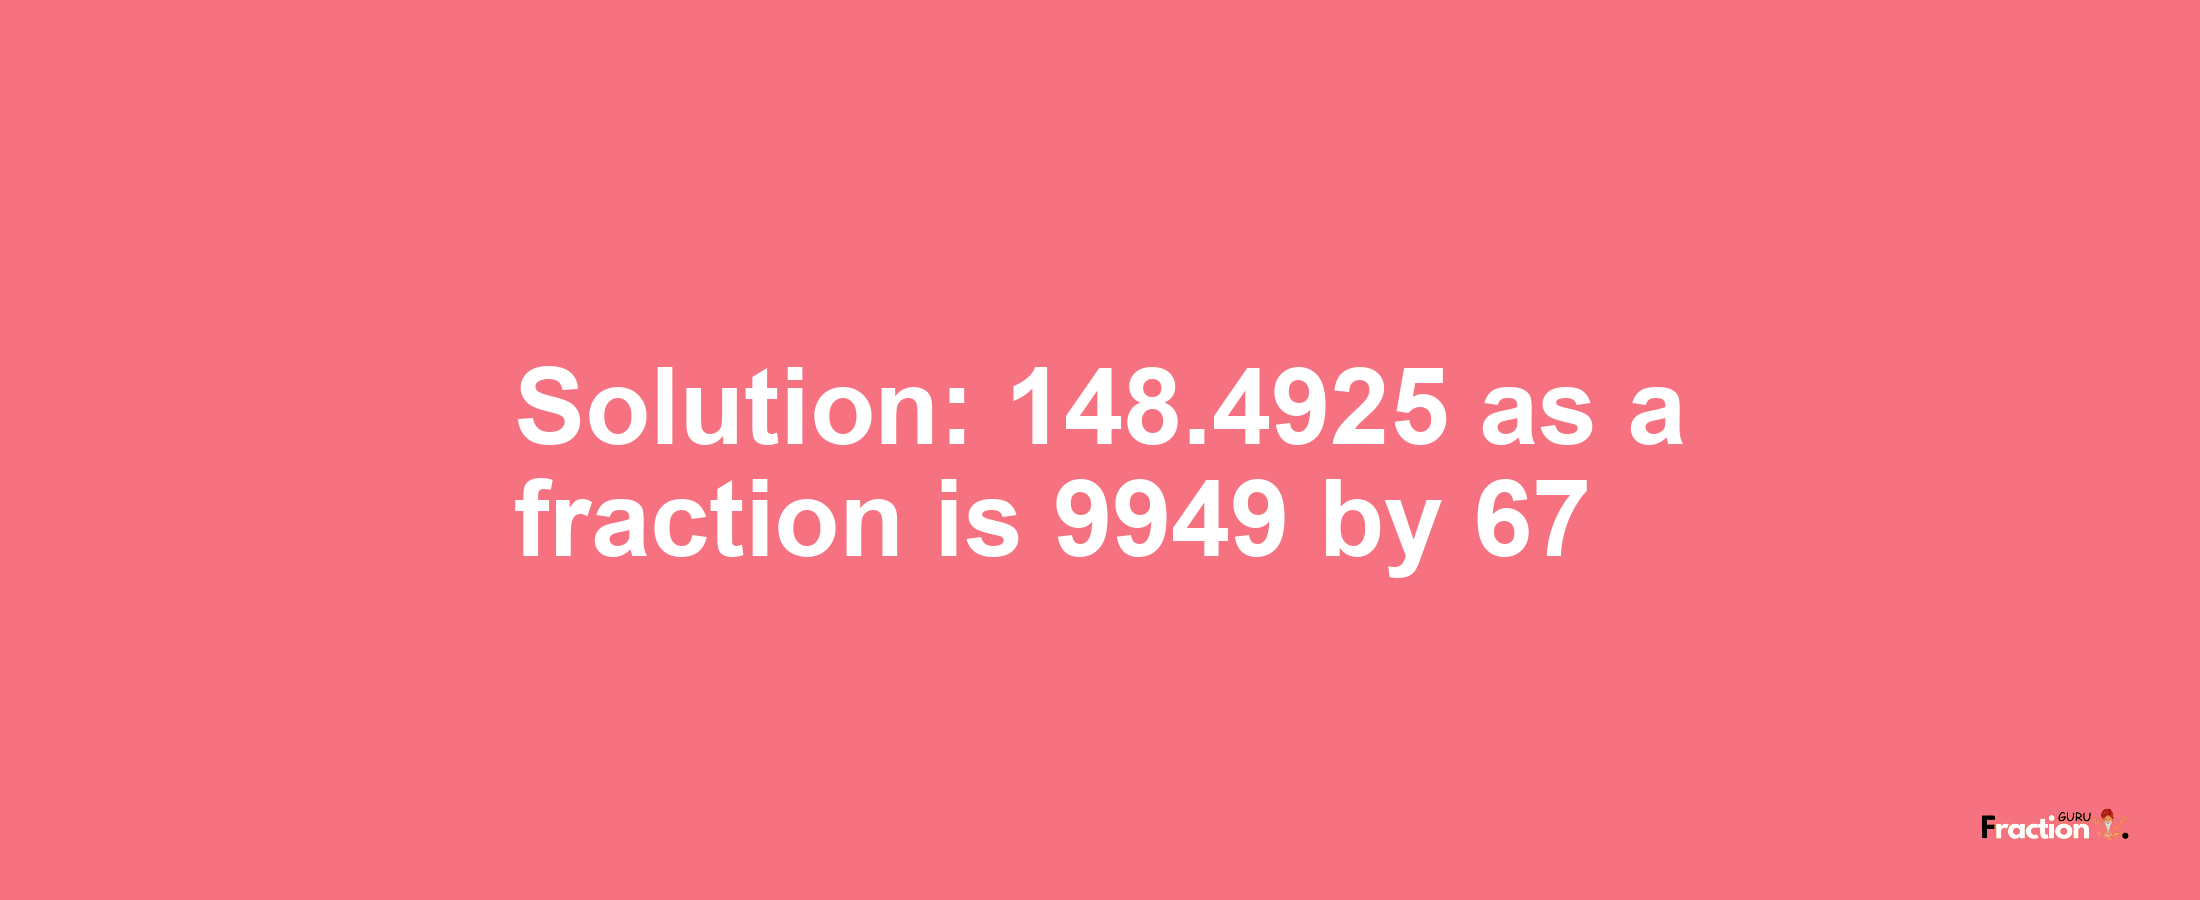 Solution:148.4925 as a fraction is 9949/67